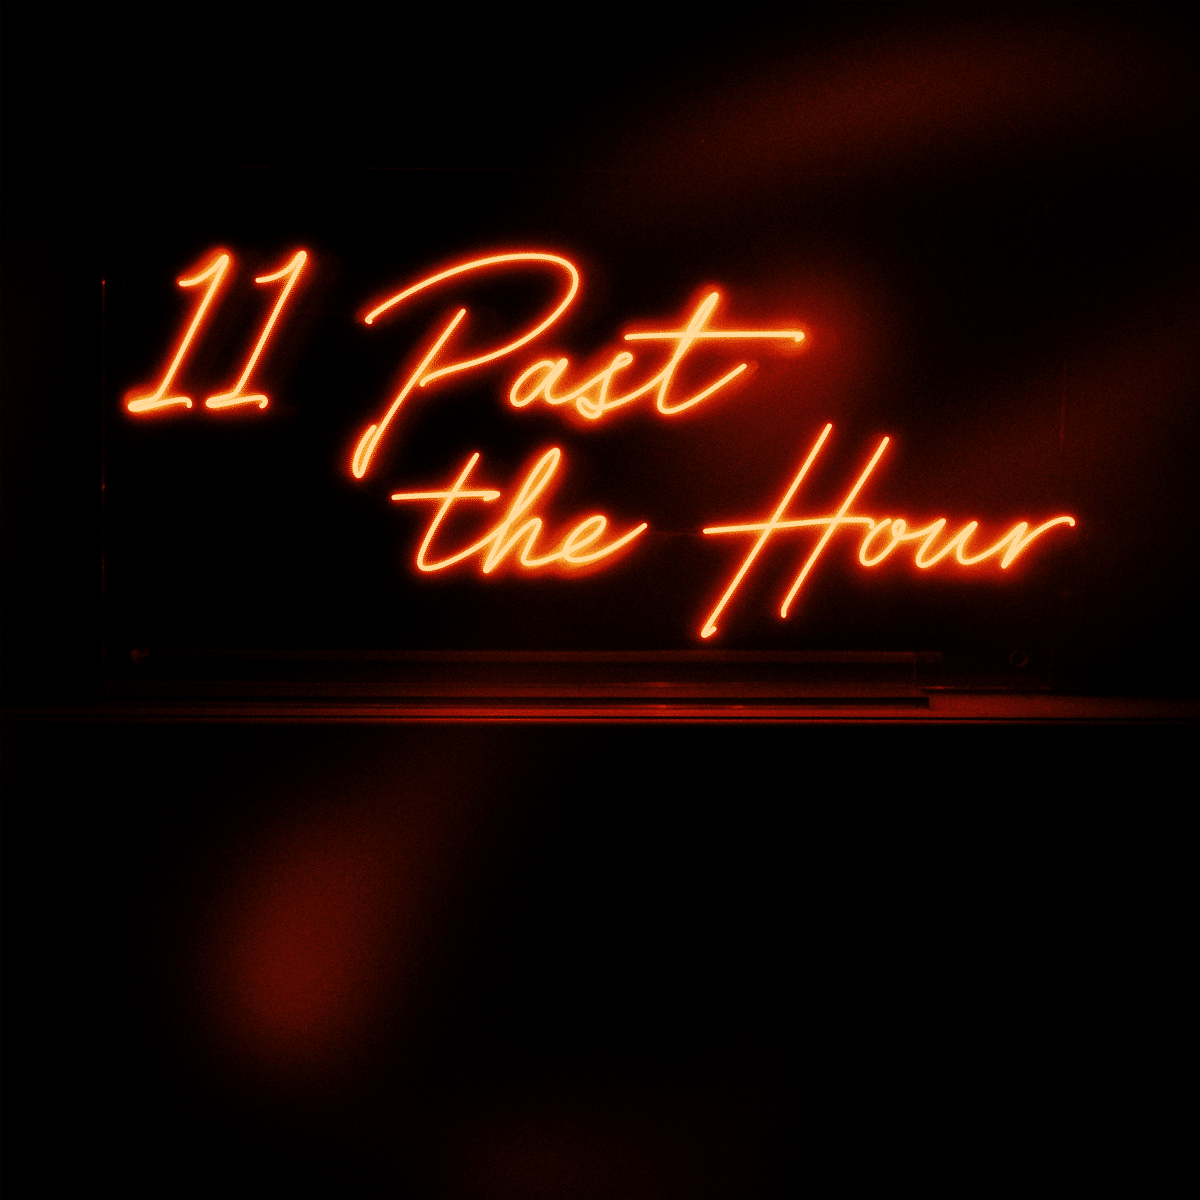 Cover Art for Imelda May's 11 Past The Hour